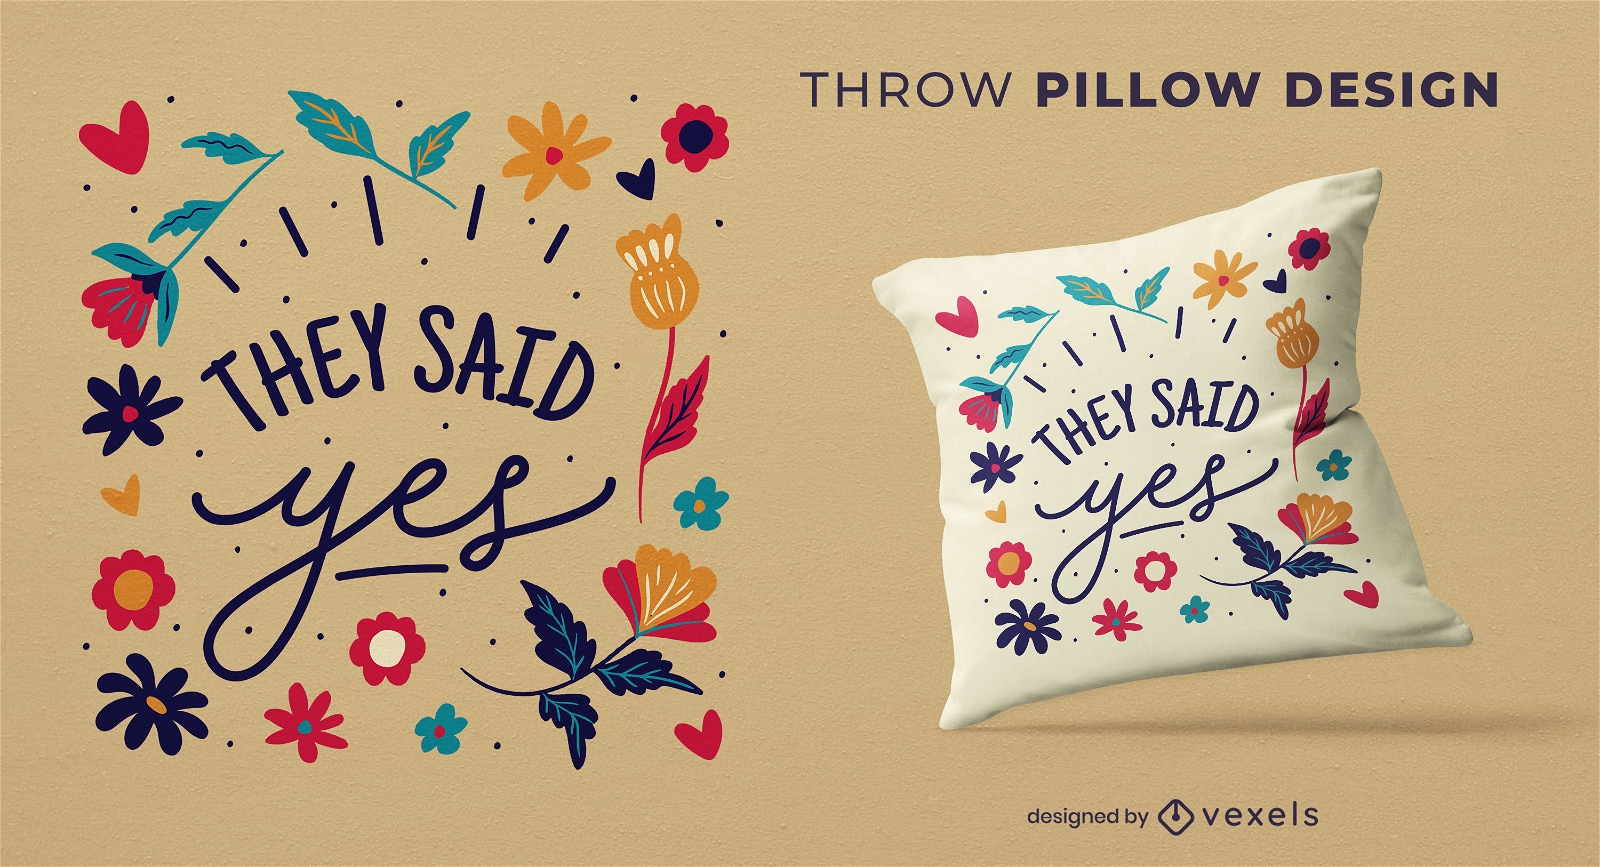 They said yes throw pillow design